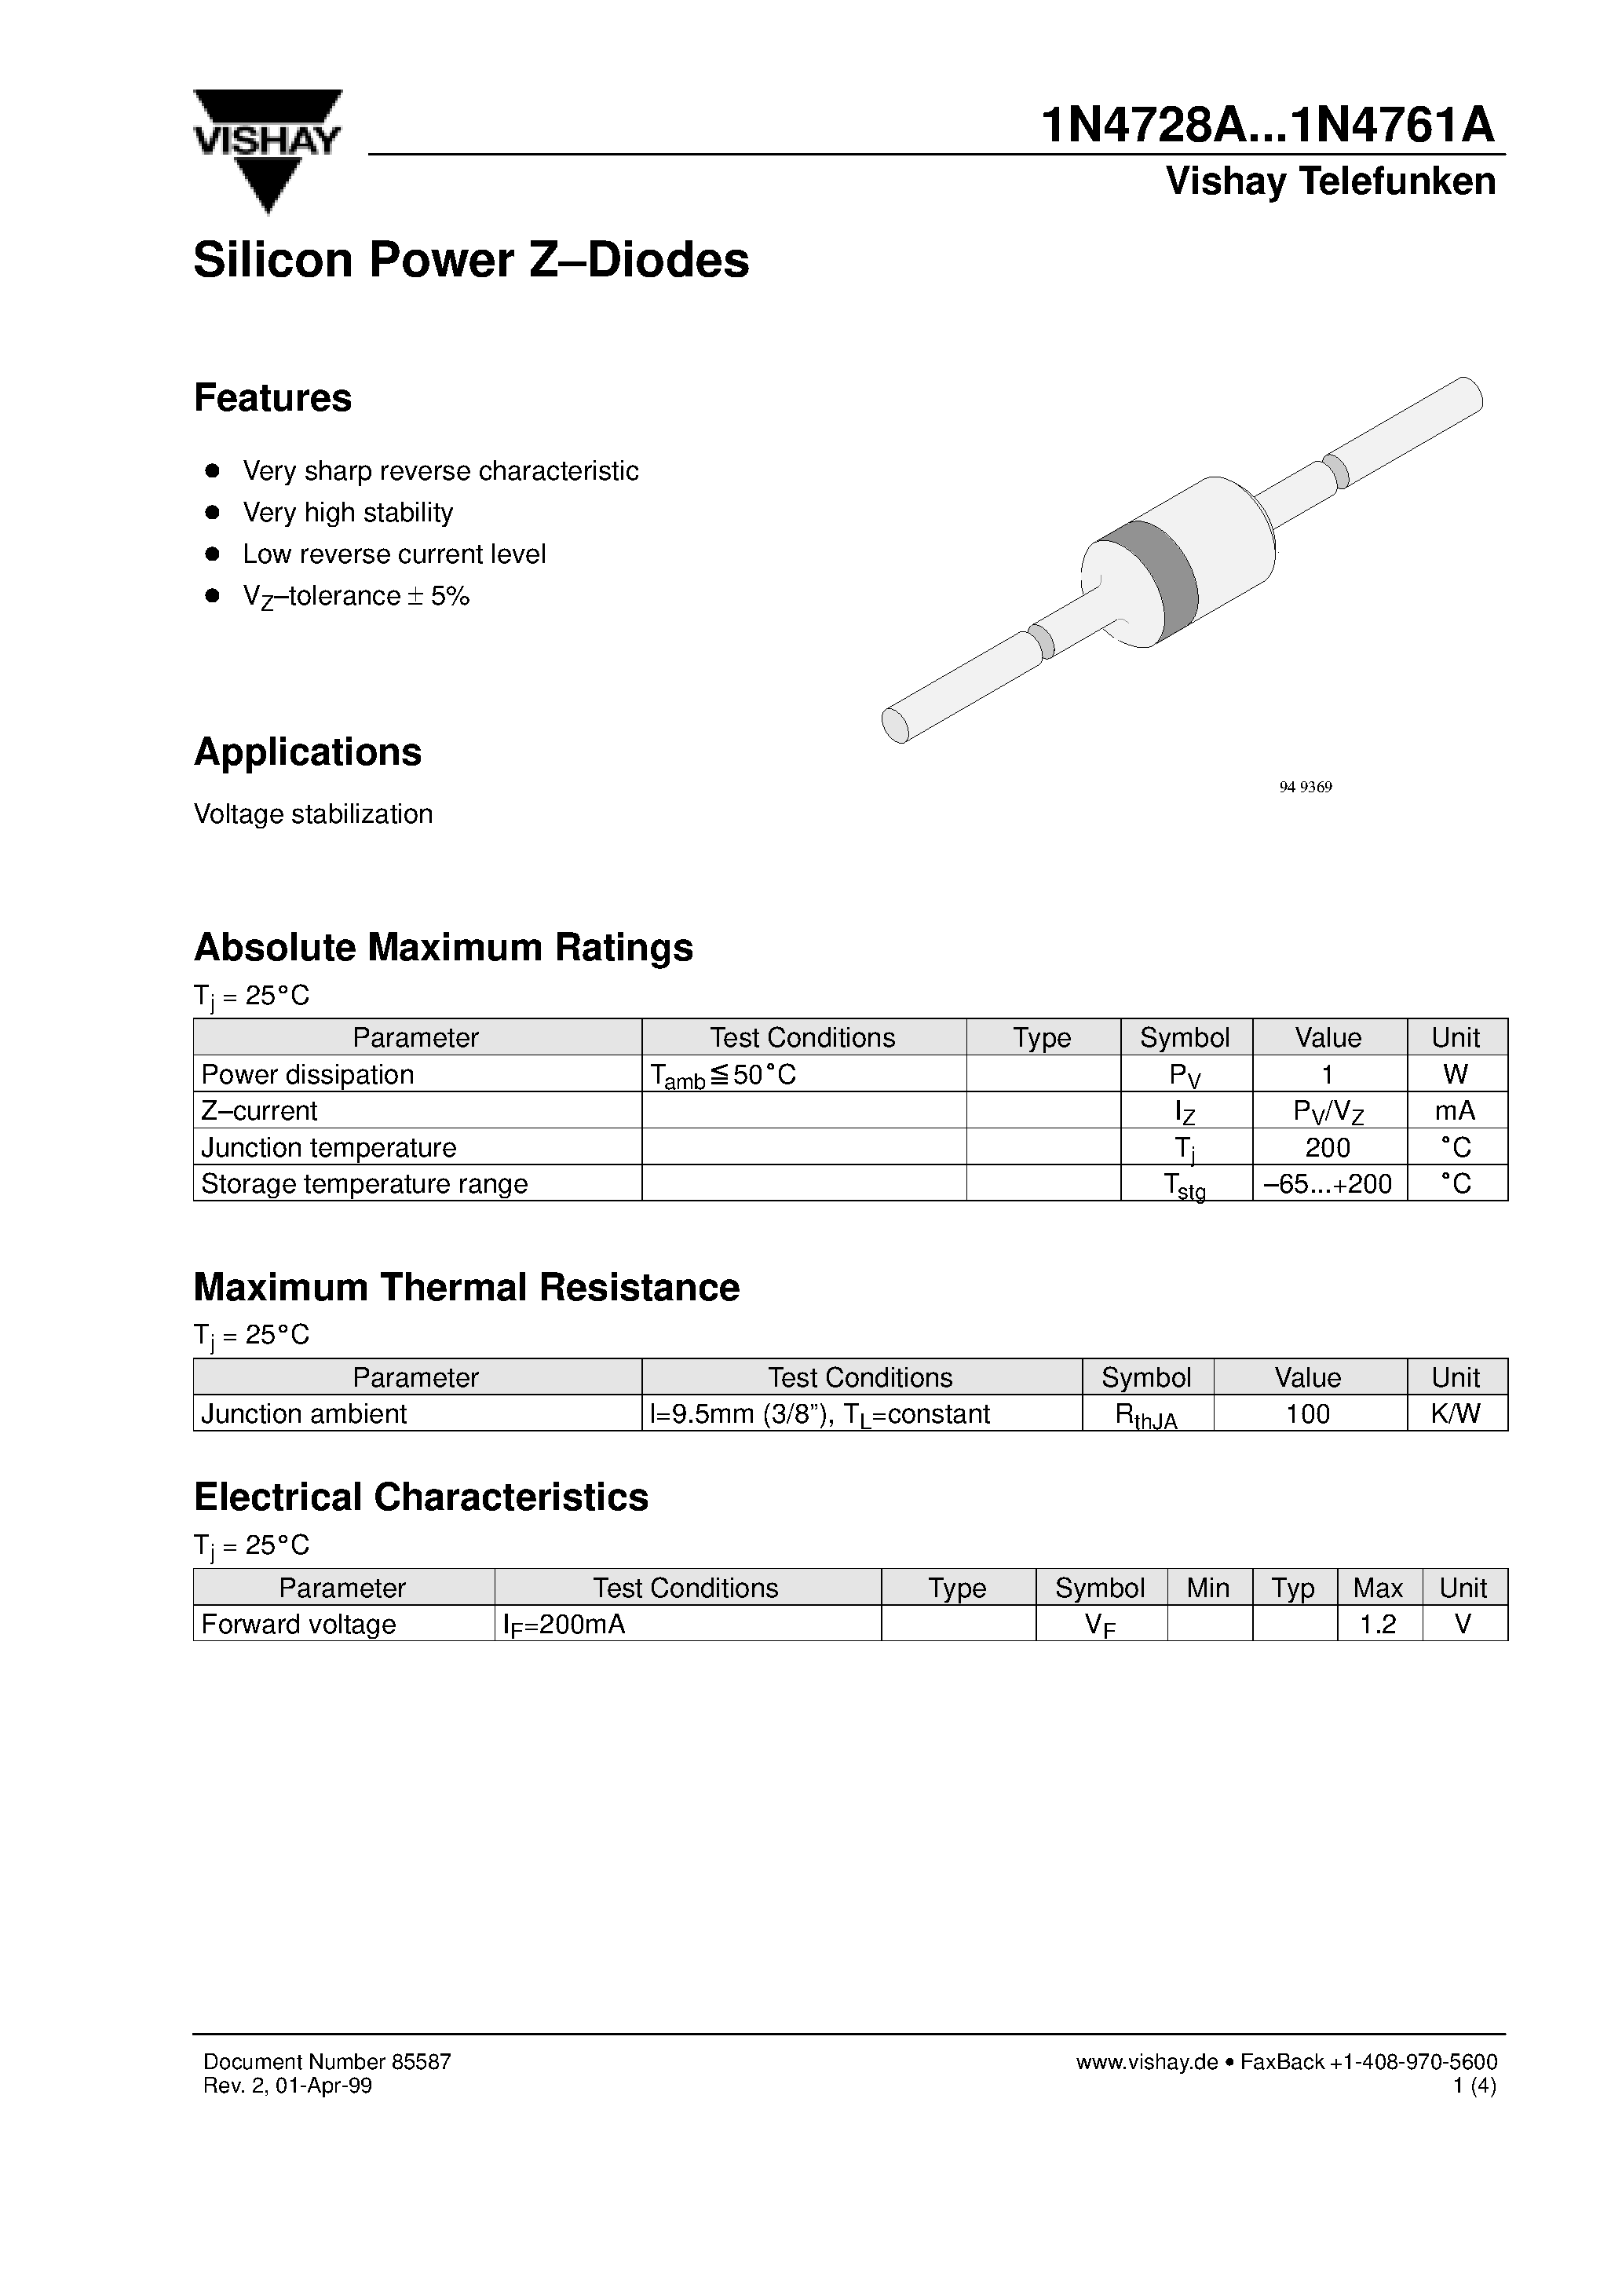 Даташит 1N4753A - Silicon Power Z-Diodes страница 1